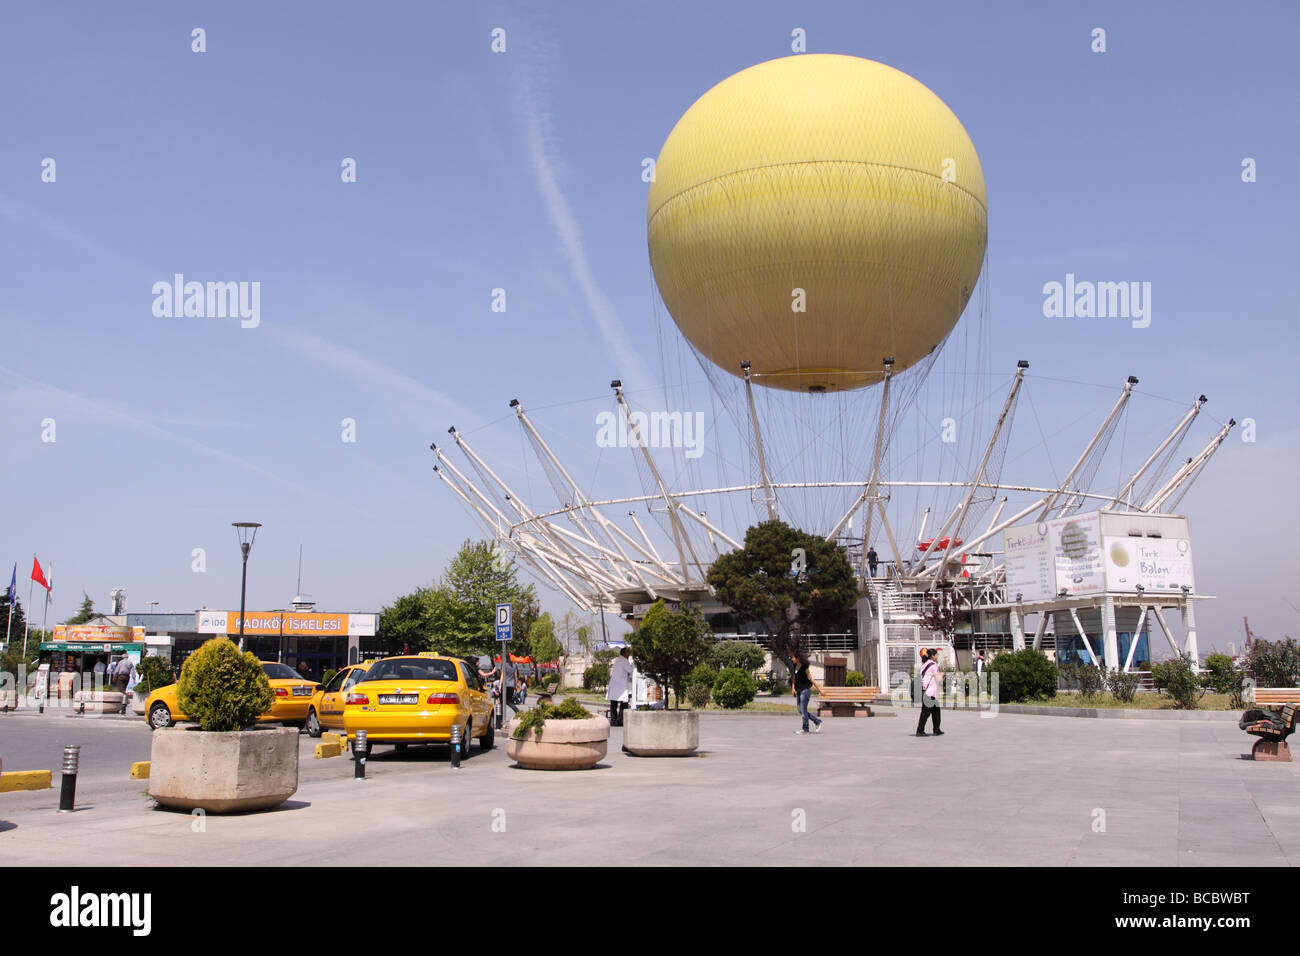 Kadikoy Istanbul fixed gas ballon ride on the shore of the Asian side of  the city Stock Photo - Alamy